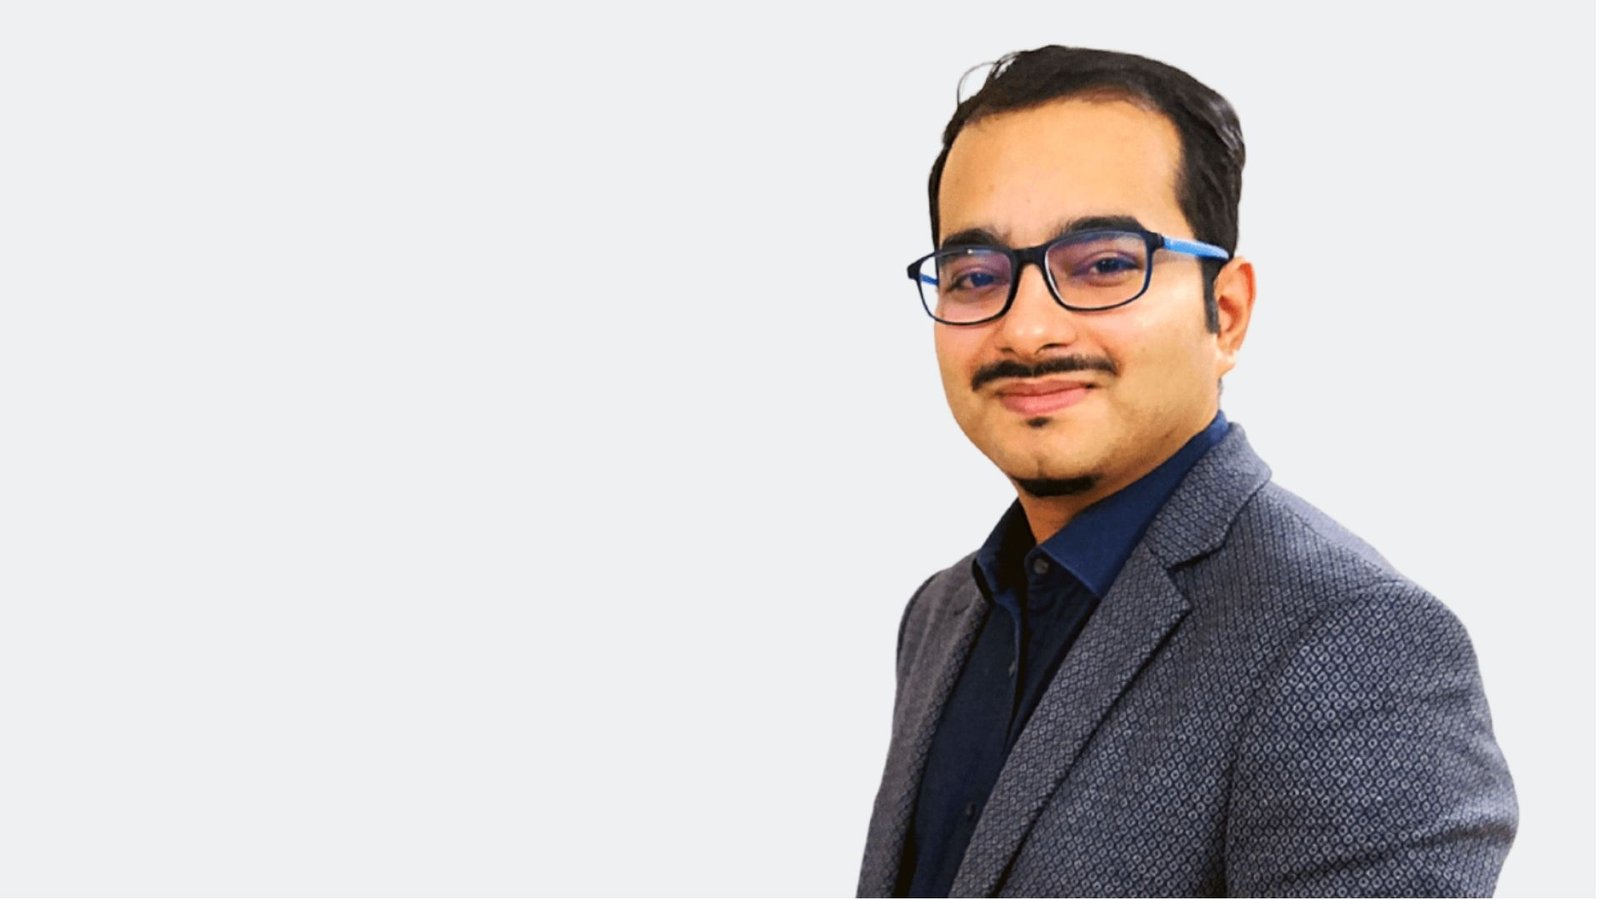 Soumik Mukherjee Co-Founder and CEO of Marketing Launch Team OÜ